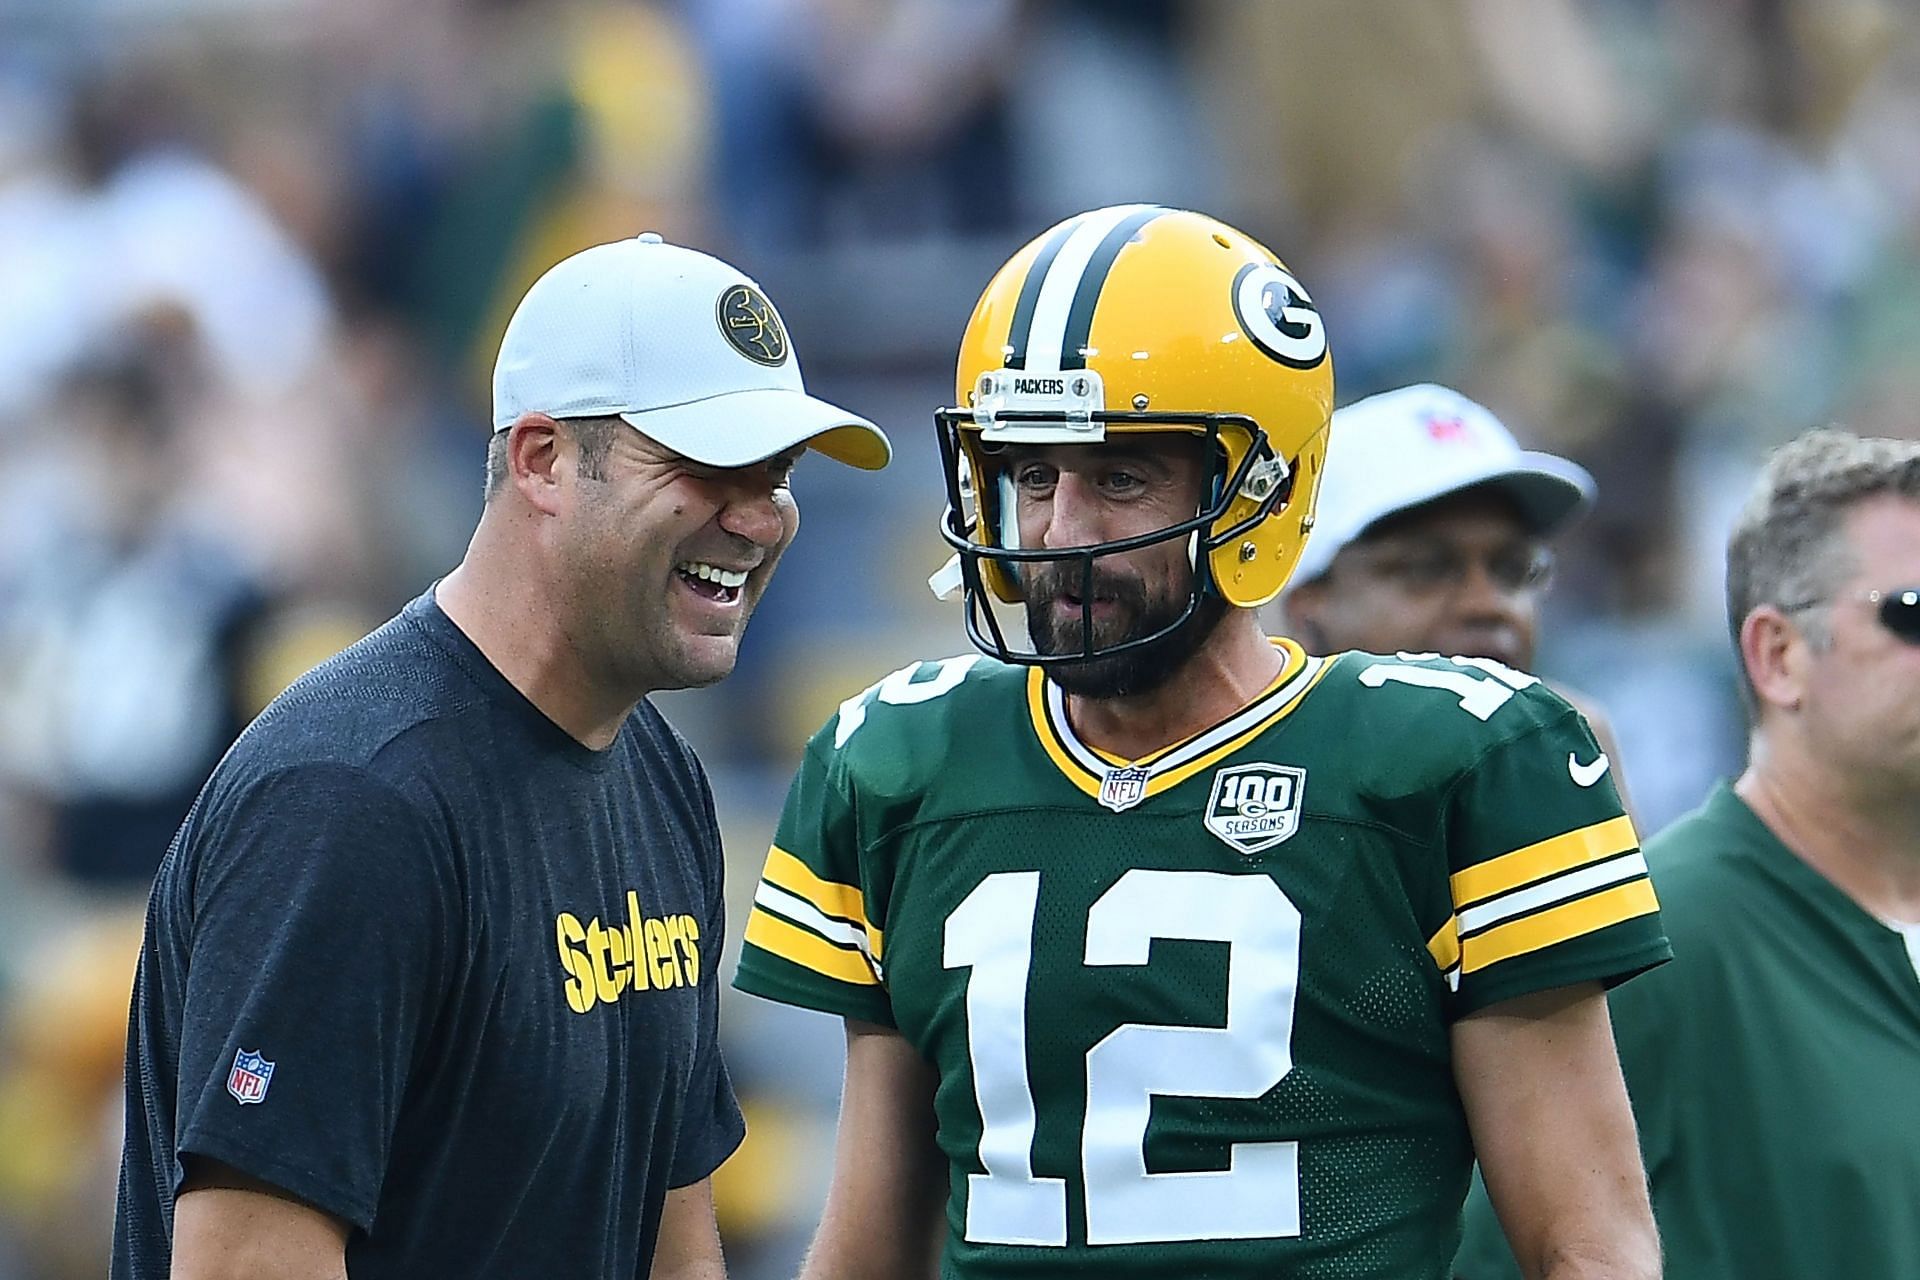 Steelers QB Ben Roethlisberger and Packers QB Aaron Rodgers